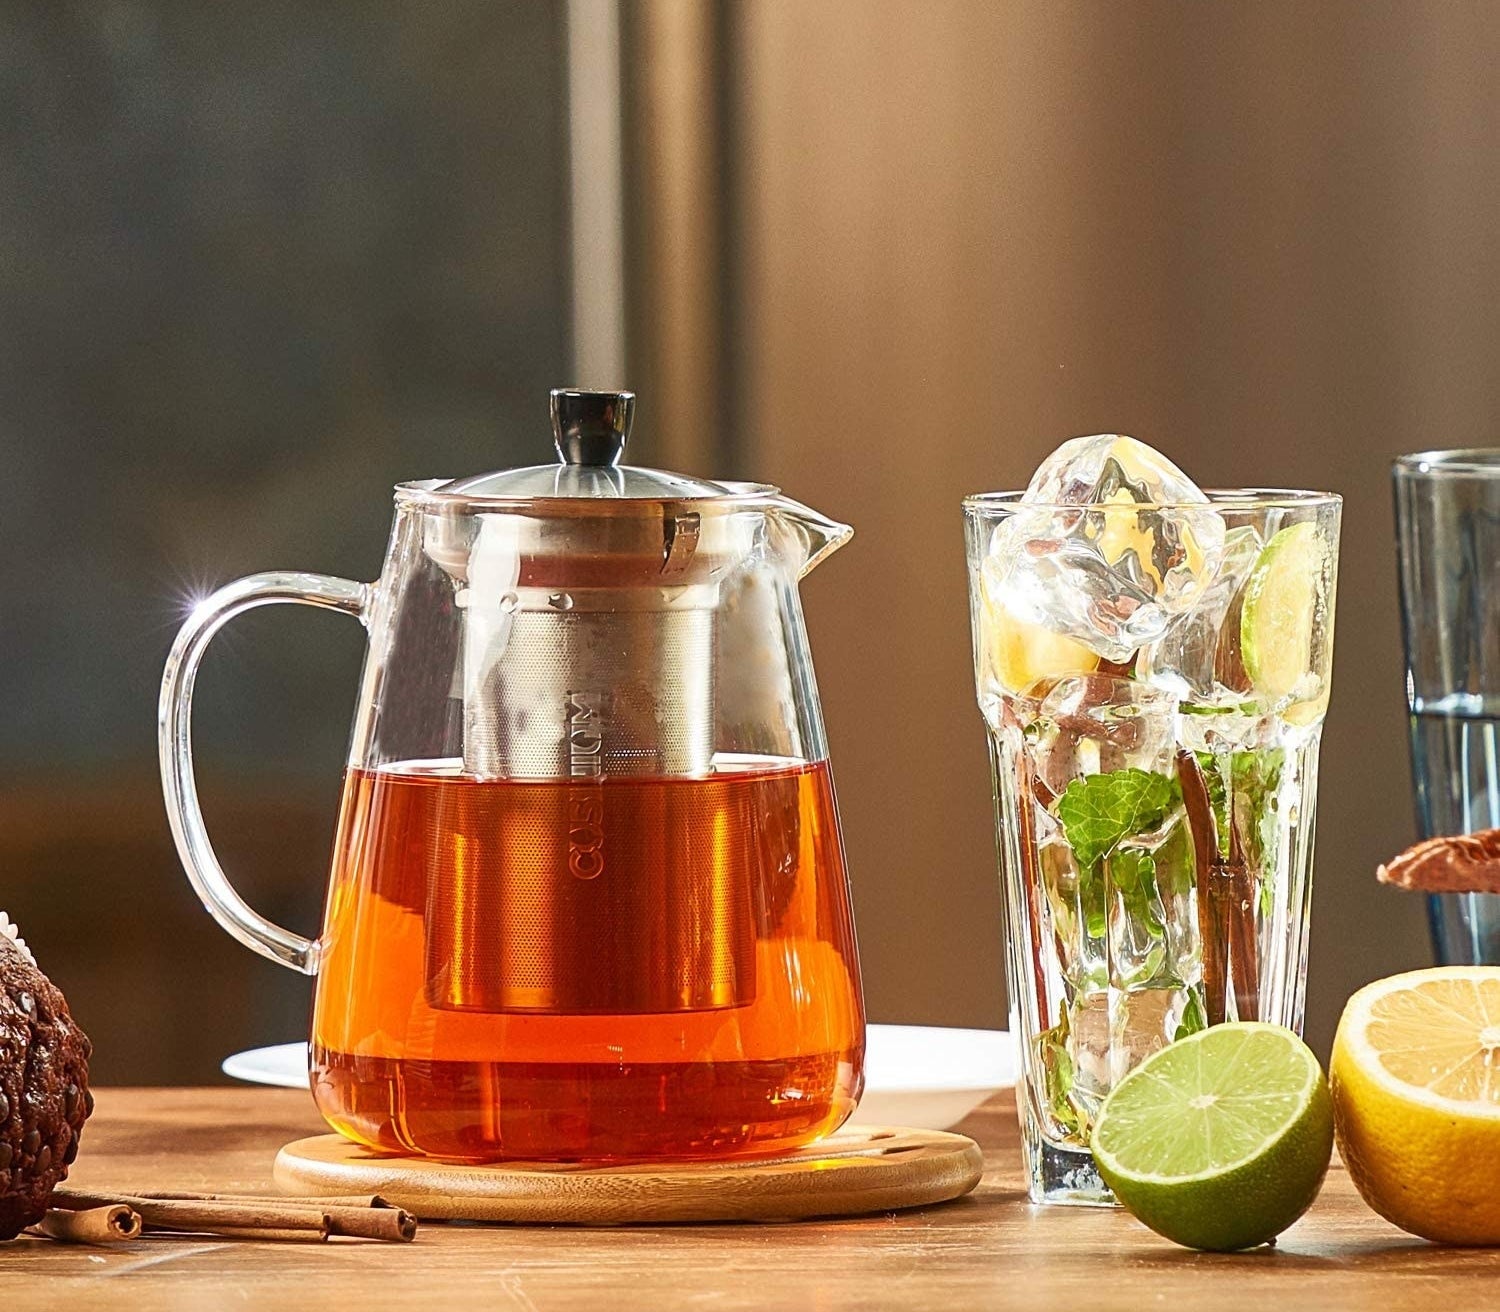 A glass teapot full of tea next to a glass of ice